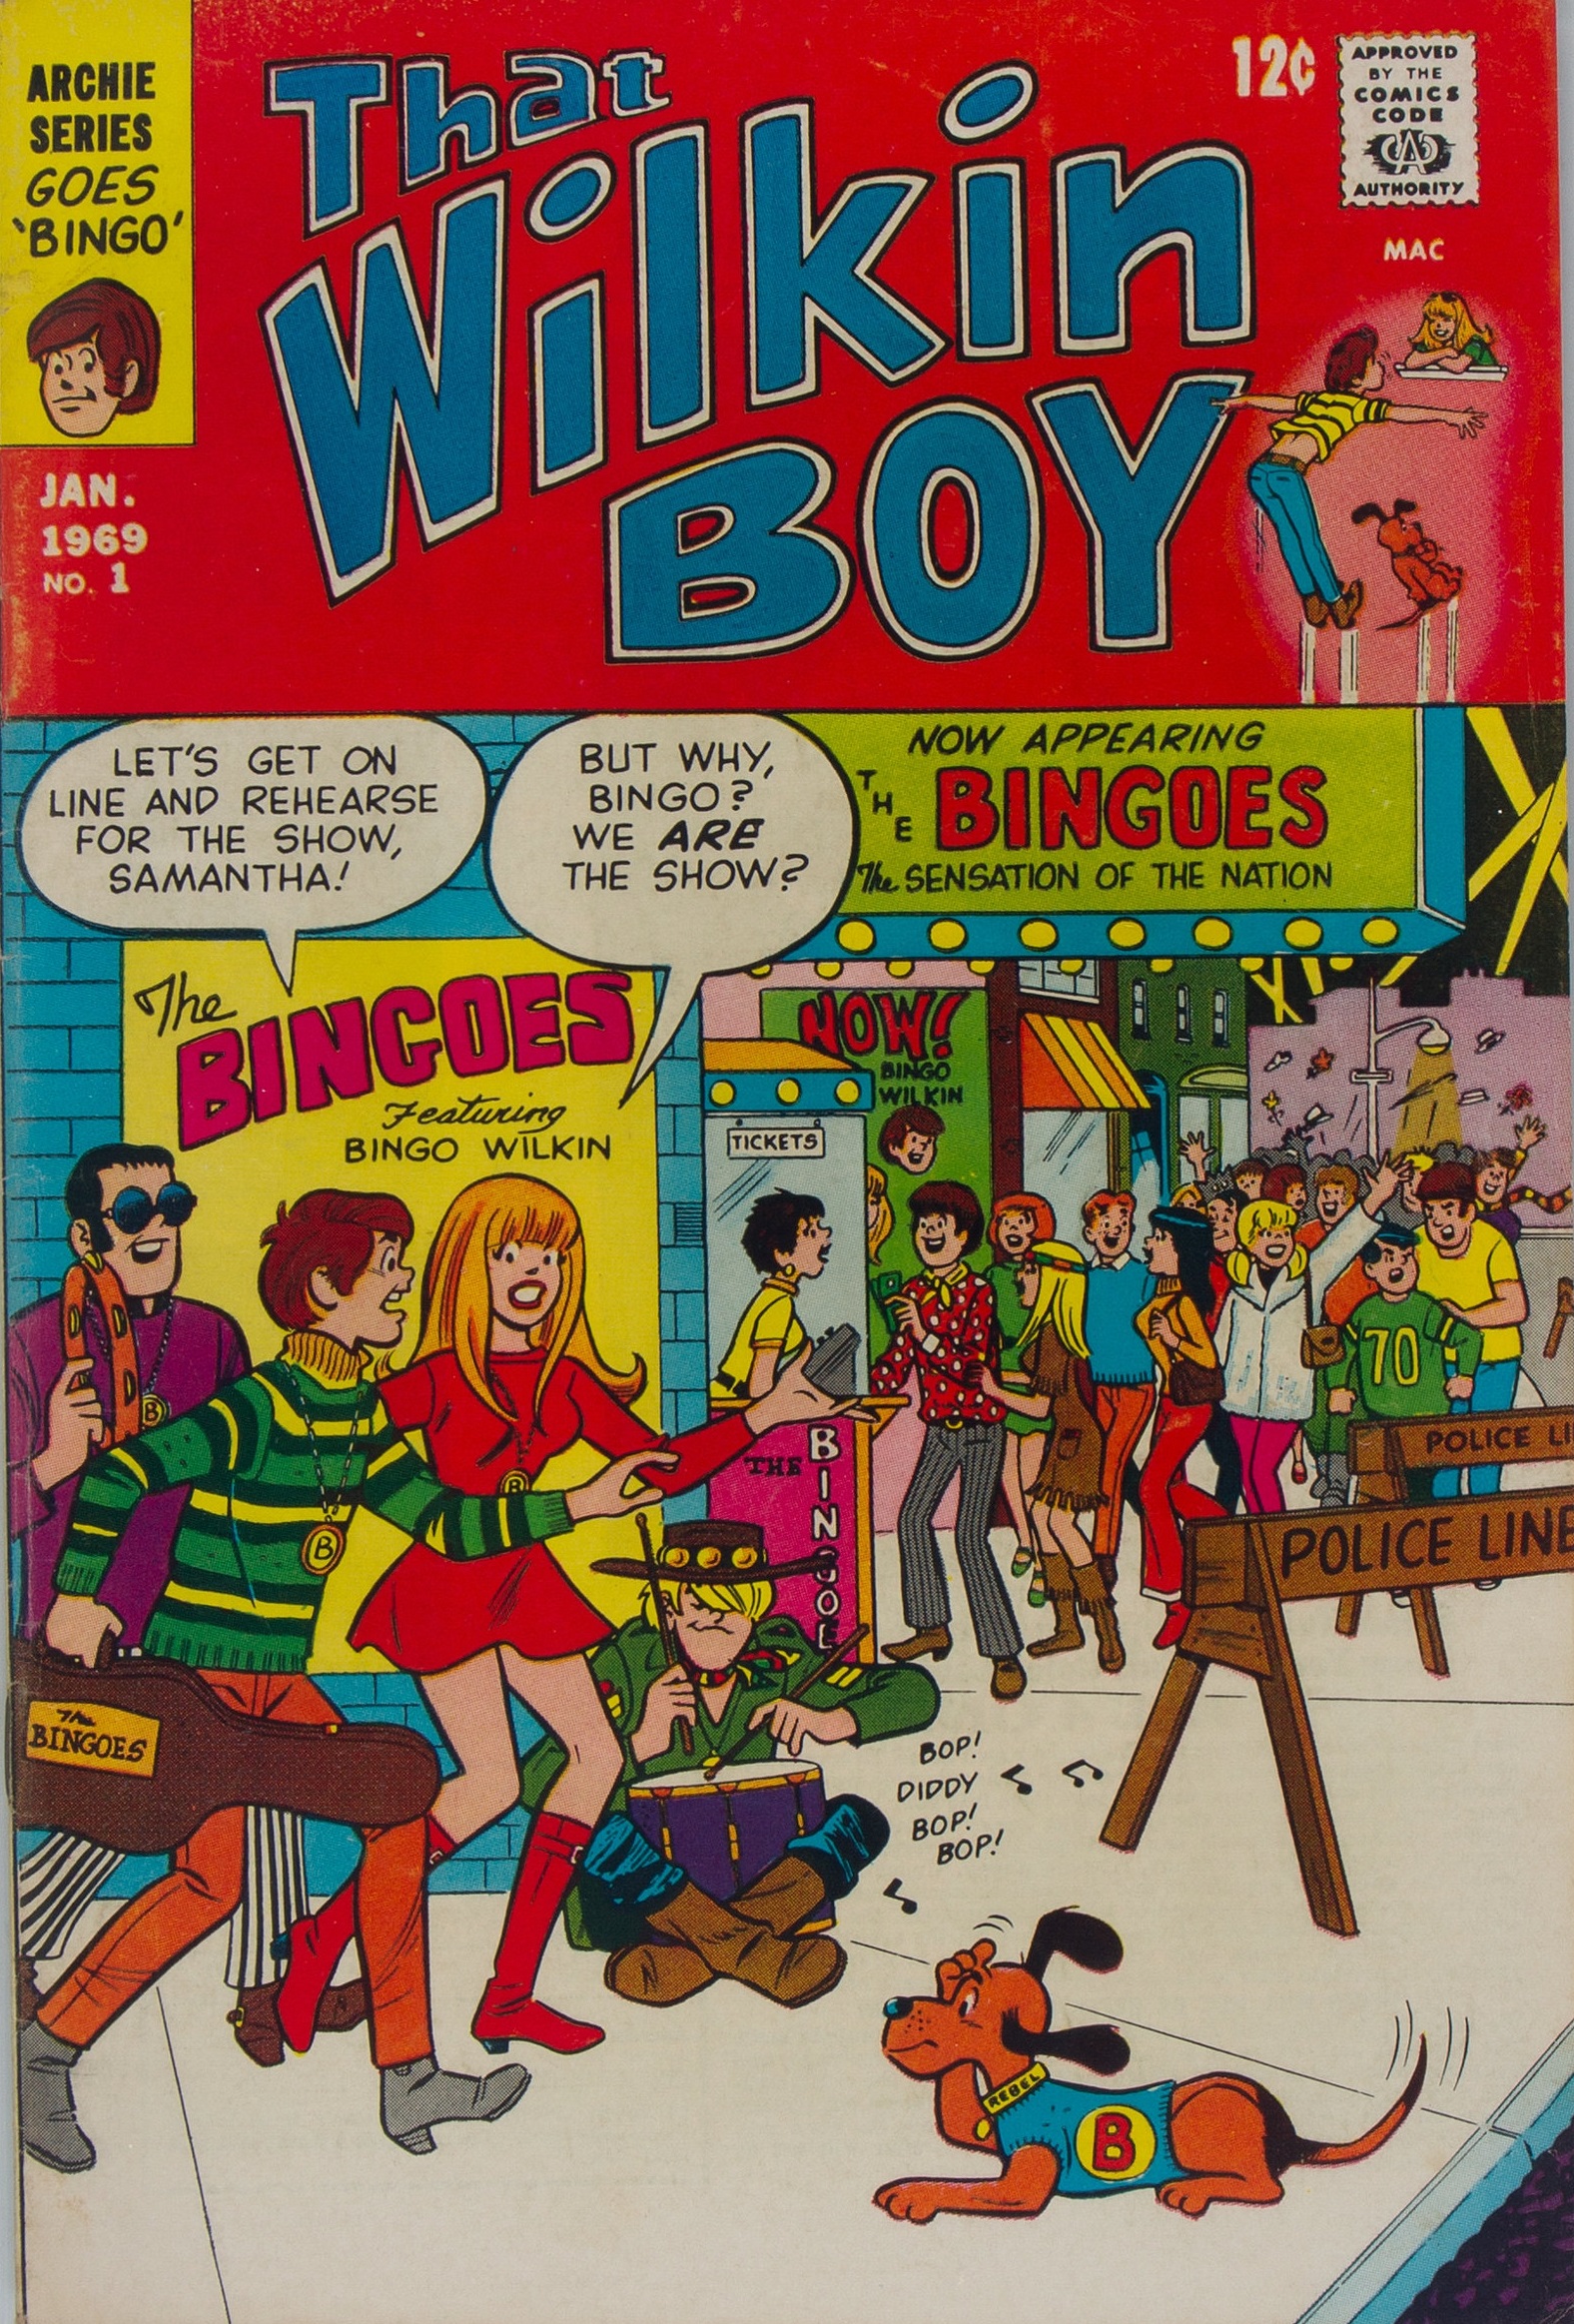 The cover of That Wilkin Boy #1